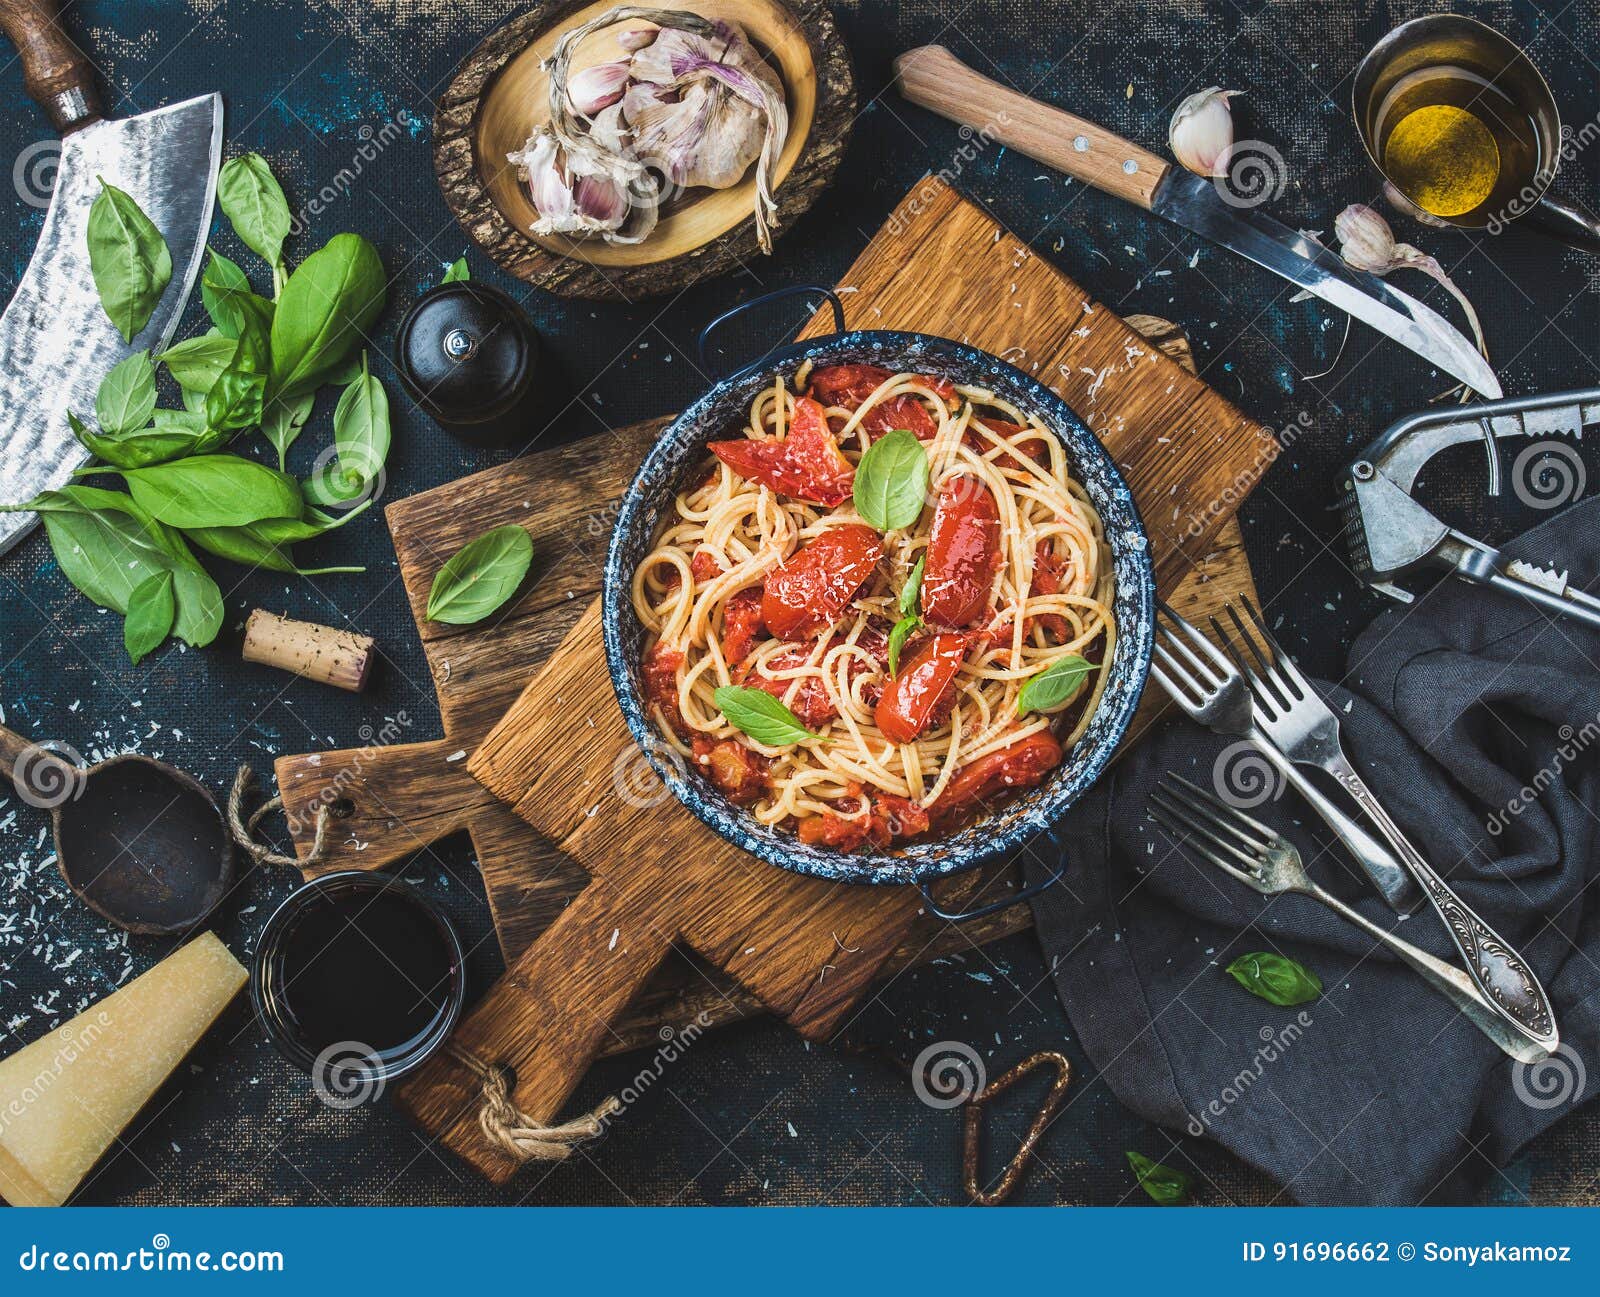 Spaghetti with Tomato and Basil in Plate on Wooden Board Stock Photo ...